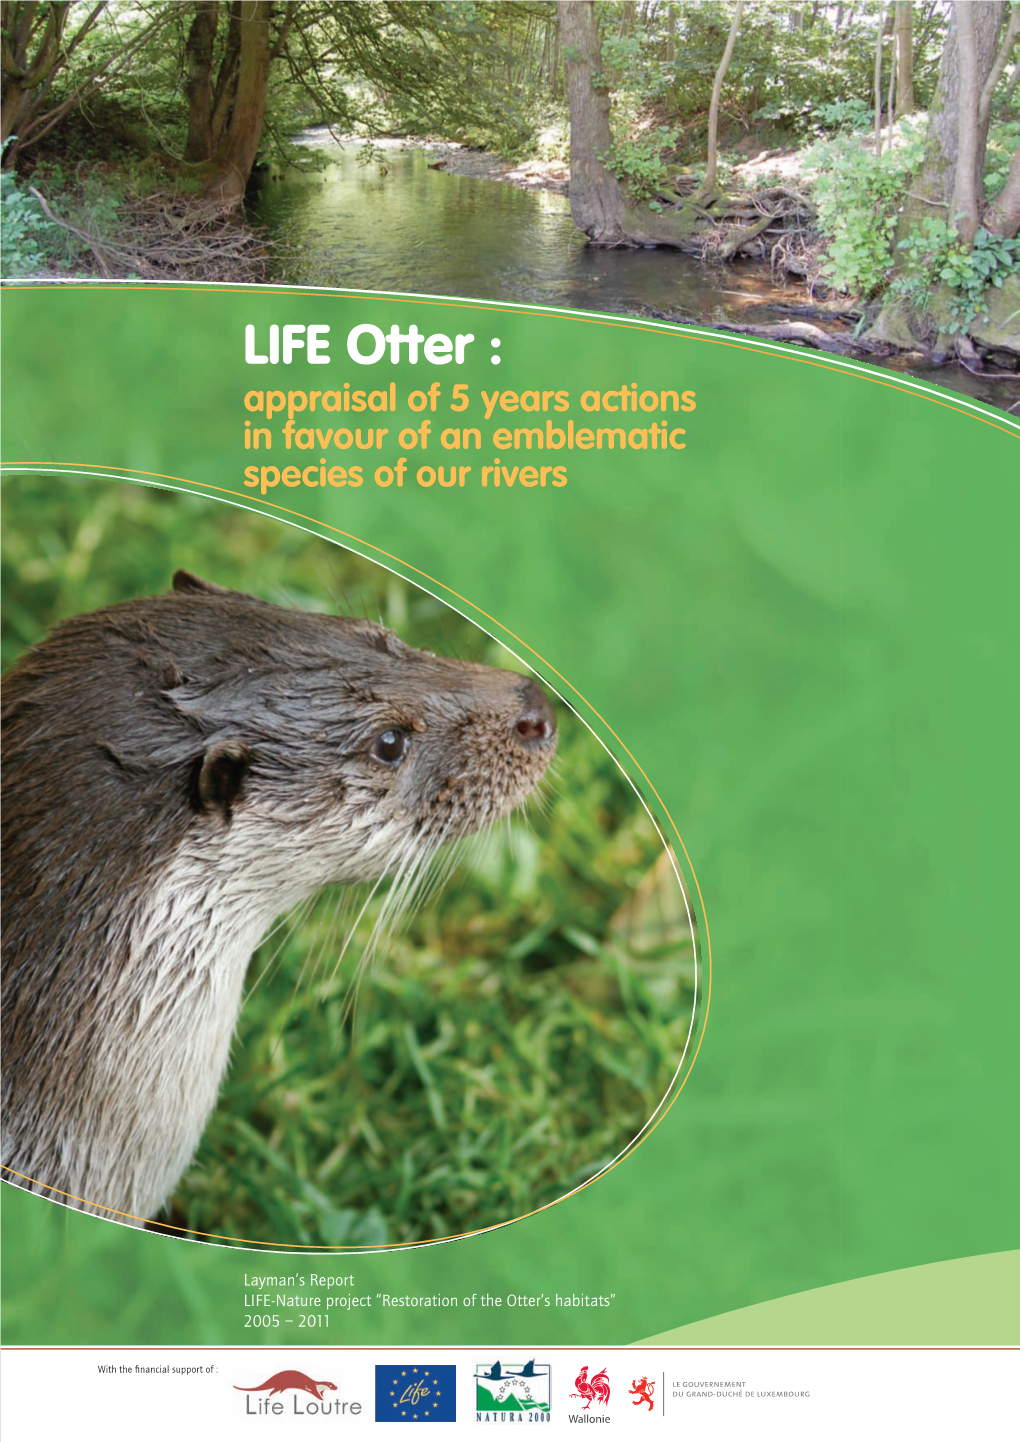 Life Otter : Appraisal of 5 Years Actions in Favour of an Emblematic Species of Our Rivers